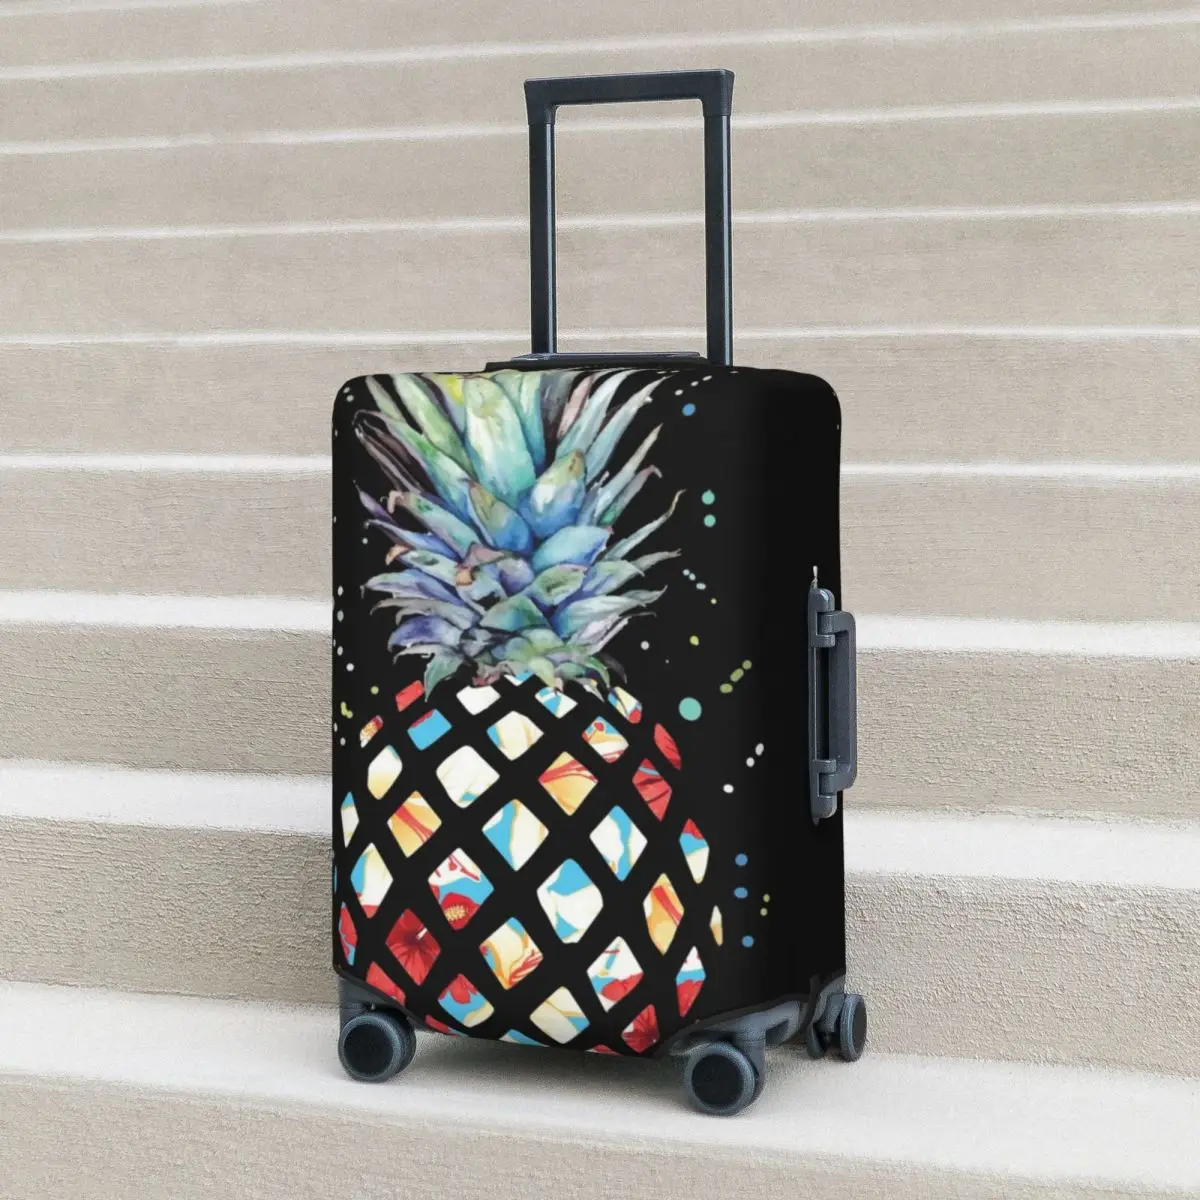 

Hawaiian Pineapple Flowers Suitcase Cover Fruit Travel Vacation Practical Luggage Accesories Protector